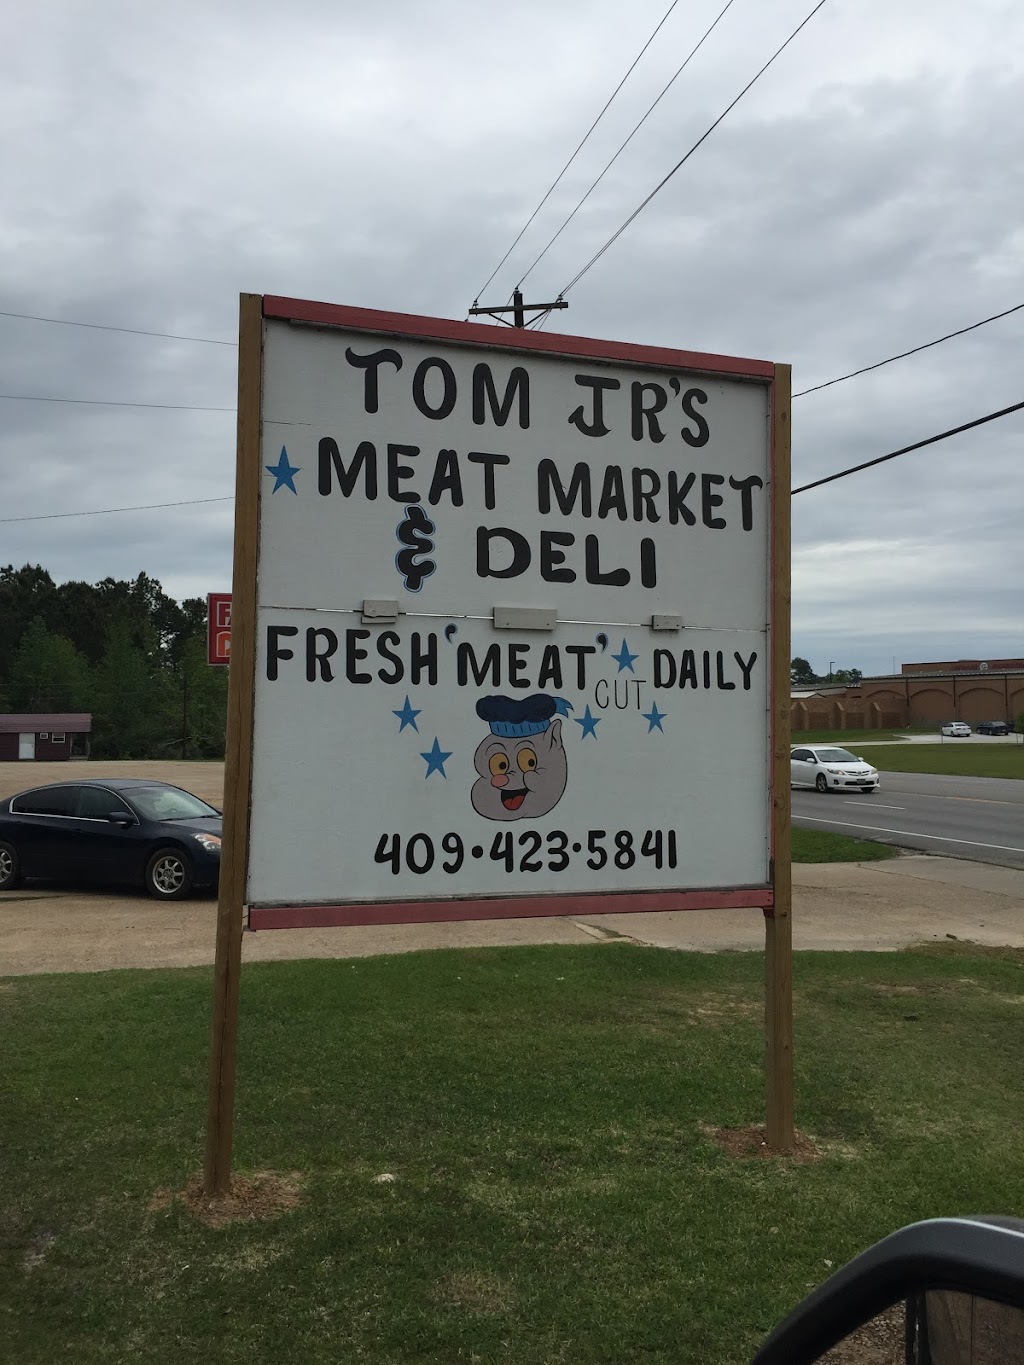 Tom Jrs Meat Market, Deli, Grill and Processing | restaurant | 1117 S Margaret Ave # B, Kirbyville, TX 75956, USA | 4094235841 OR +1 409-423-5841